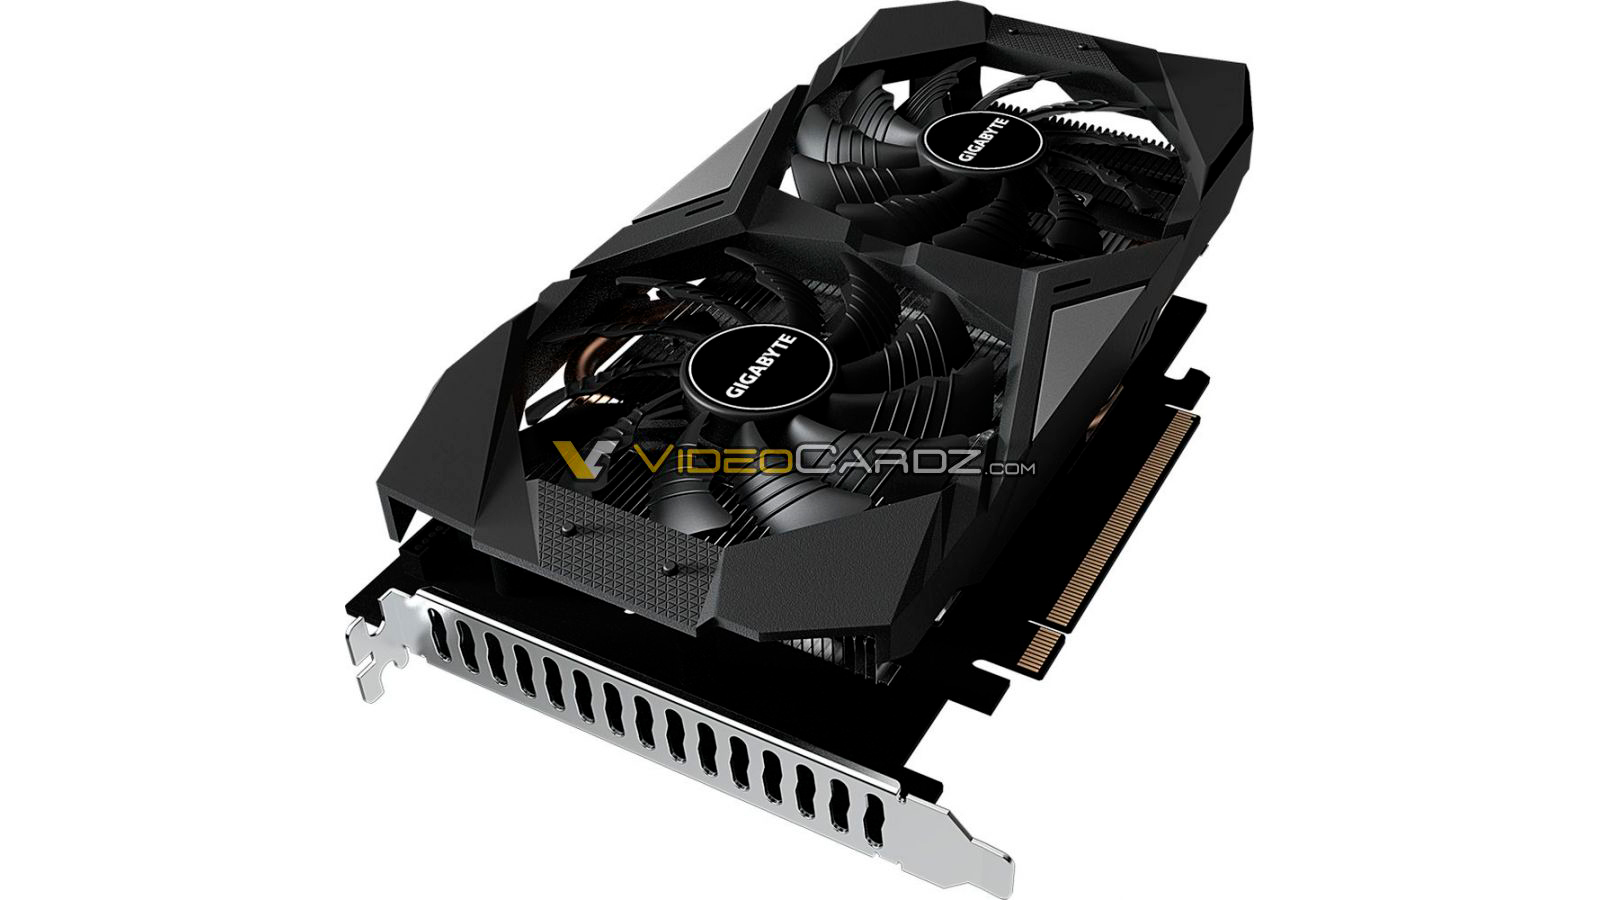 gigabyte-cmp-30hx:-a-geforce-gtx-1660-super-without-the-display-outputs